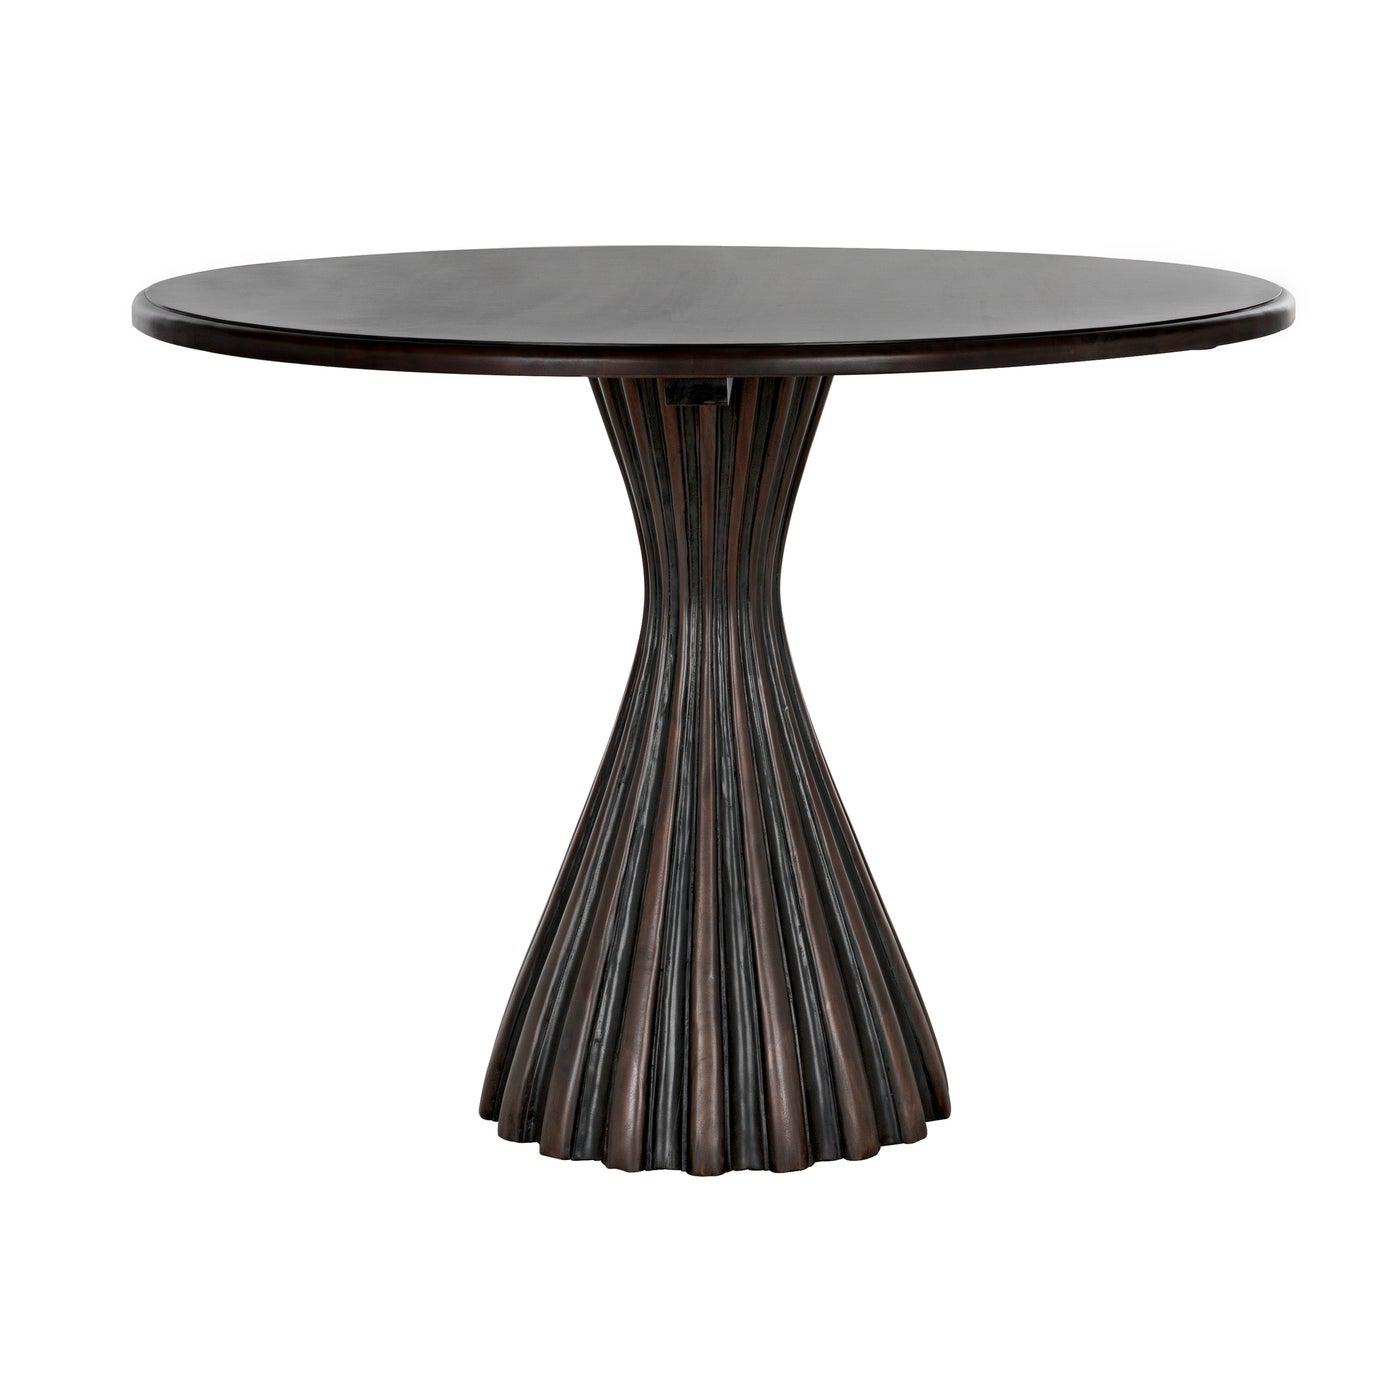 Osiris Dining Table, Pale Rubbed with Light Brown Trim-Noir Furniture-Blue Hand Home